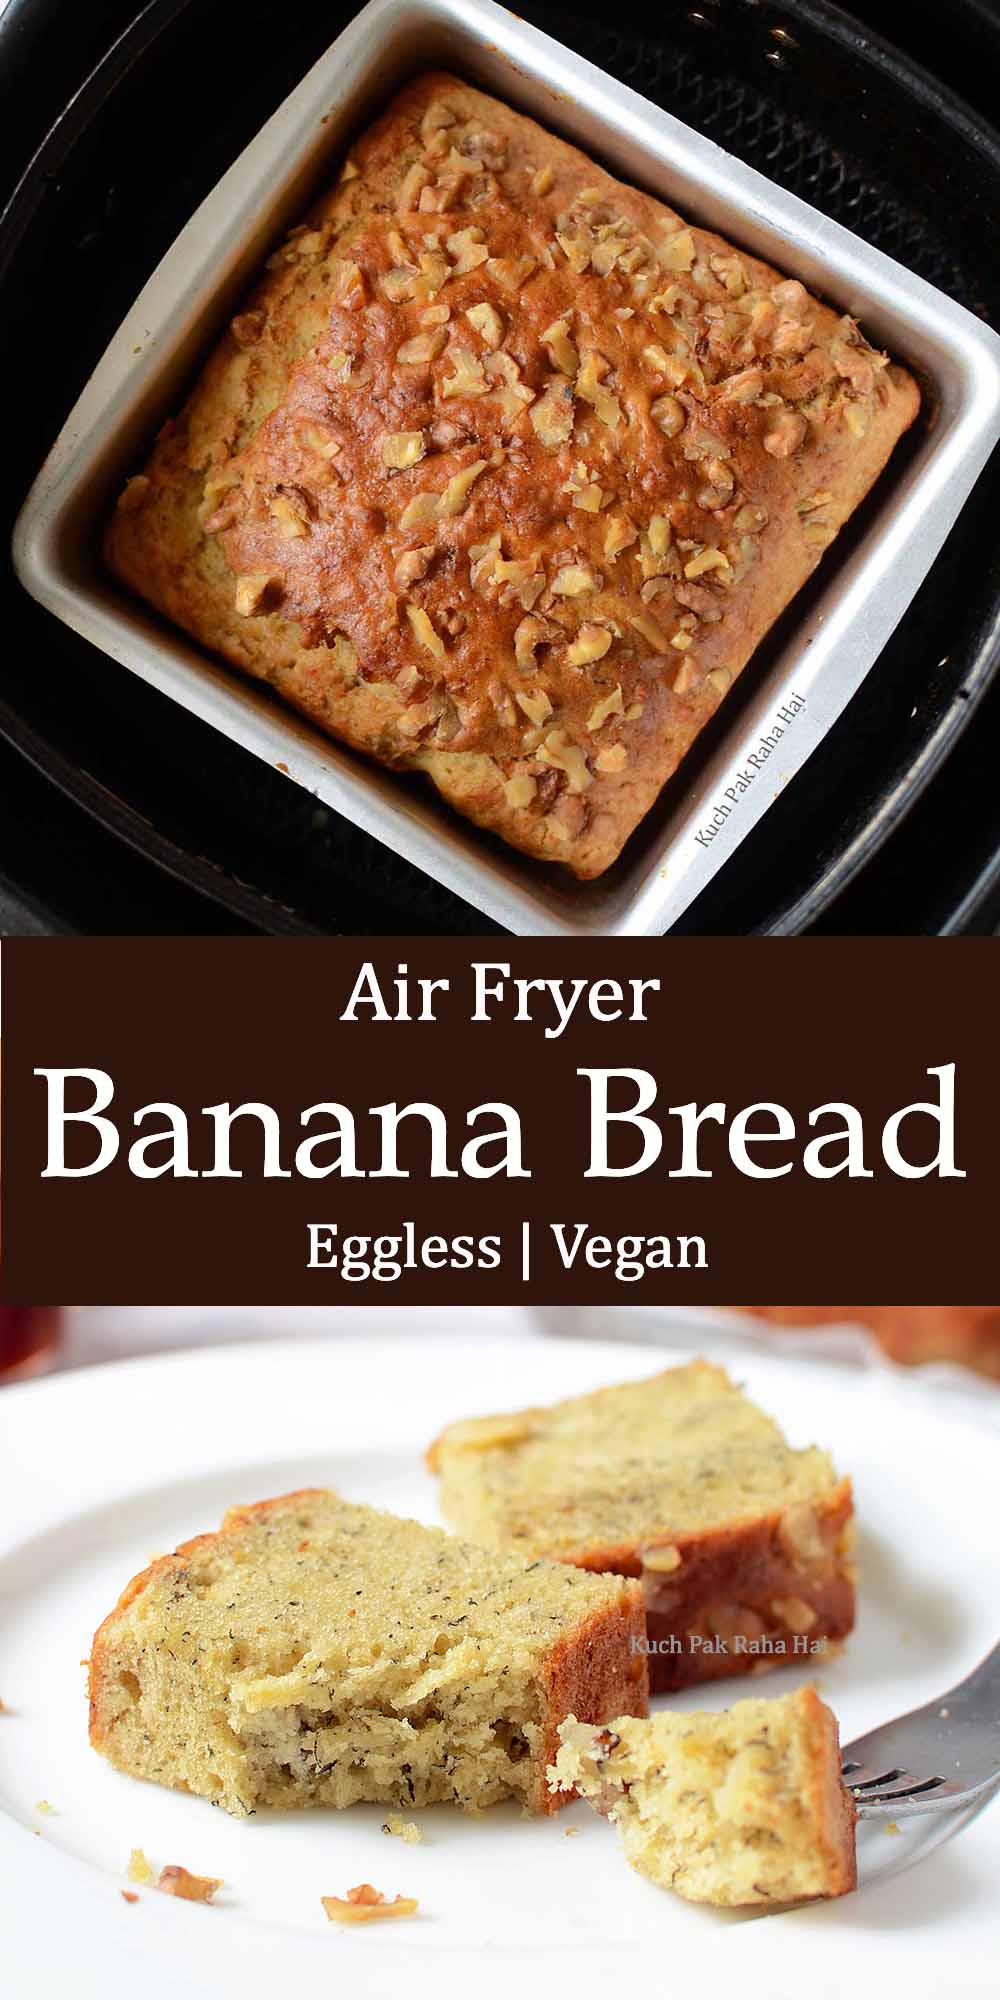 Air Fryer Banana Bread without eggs